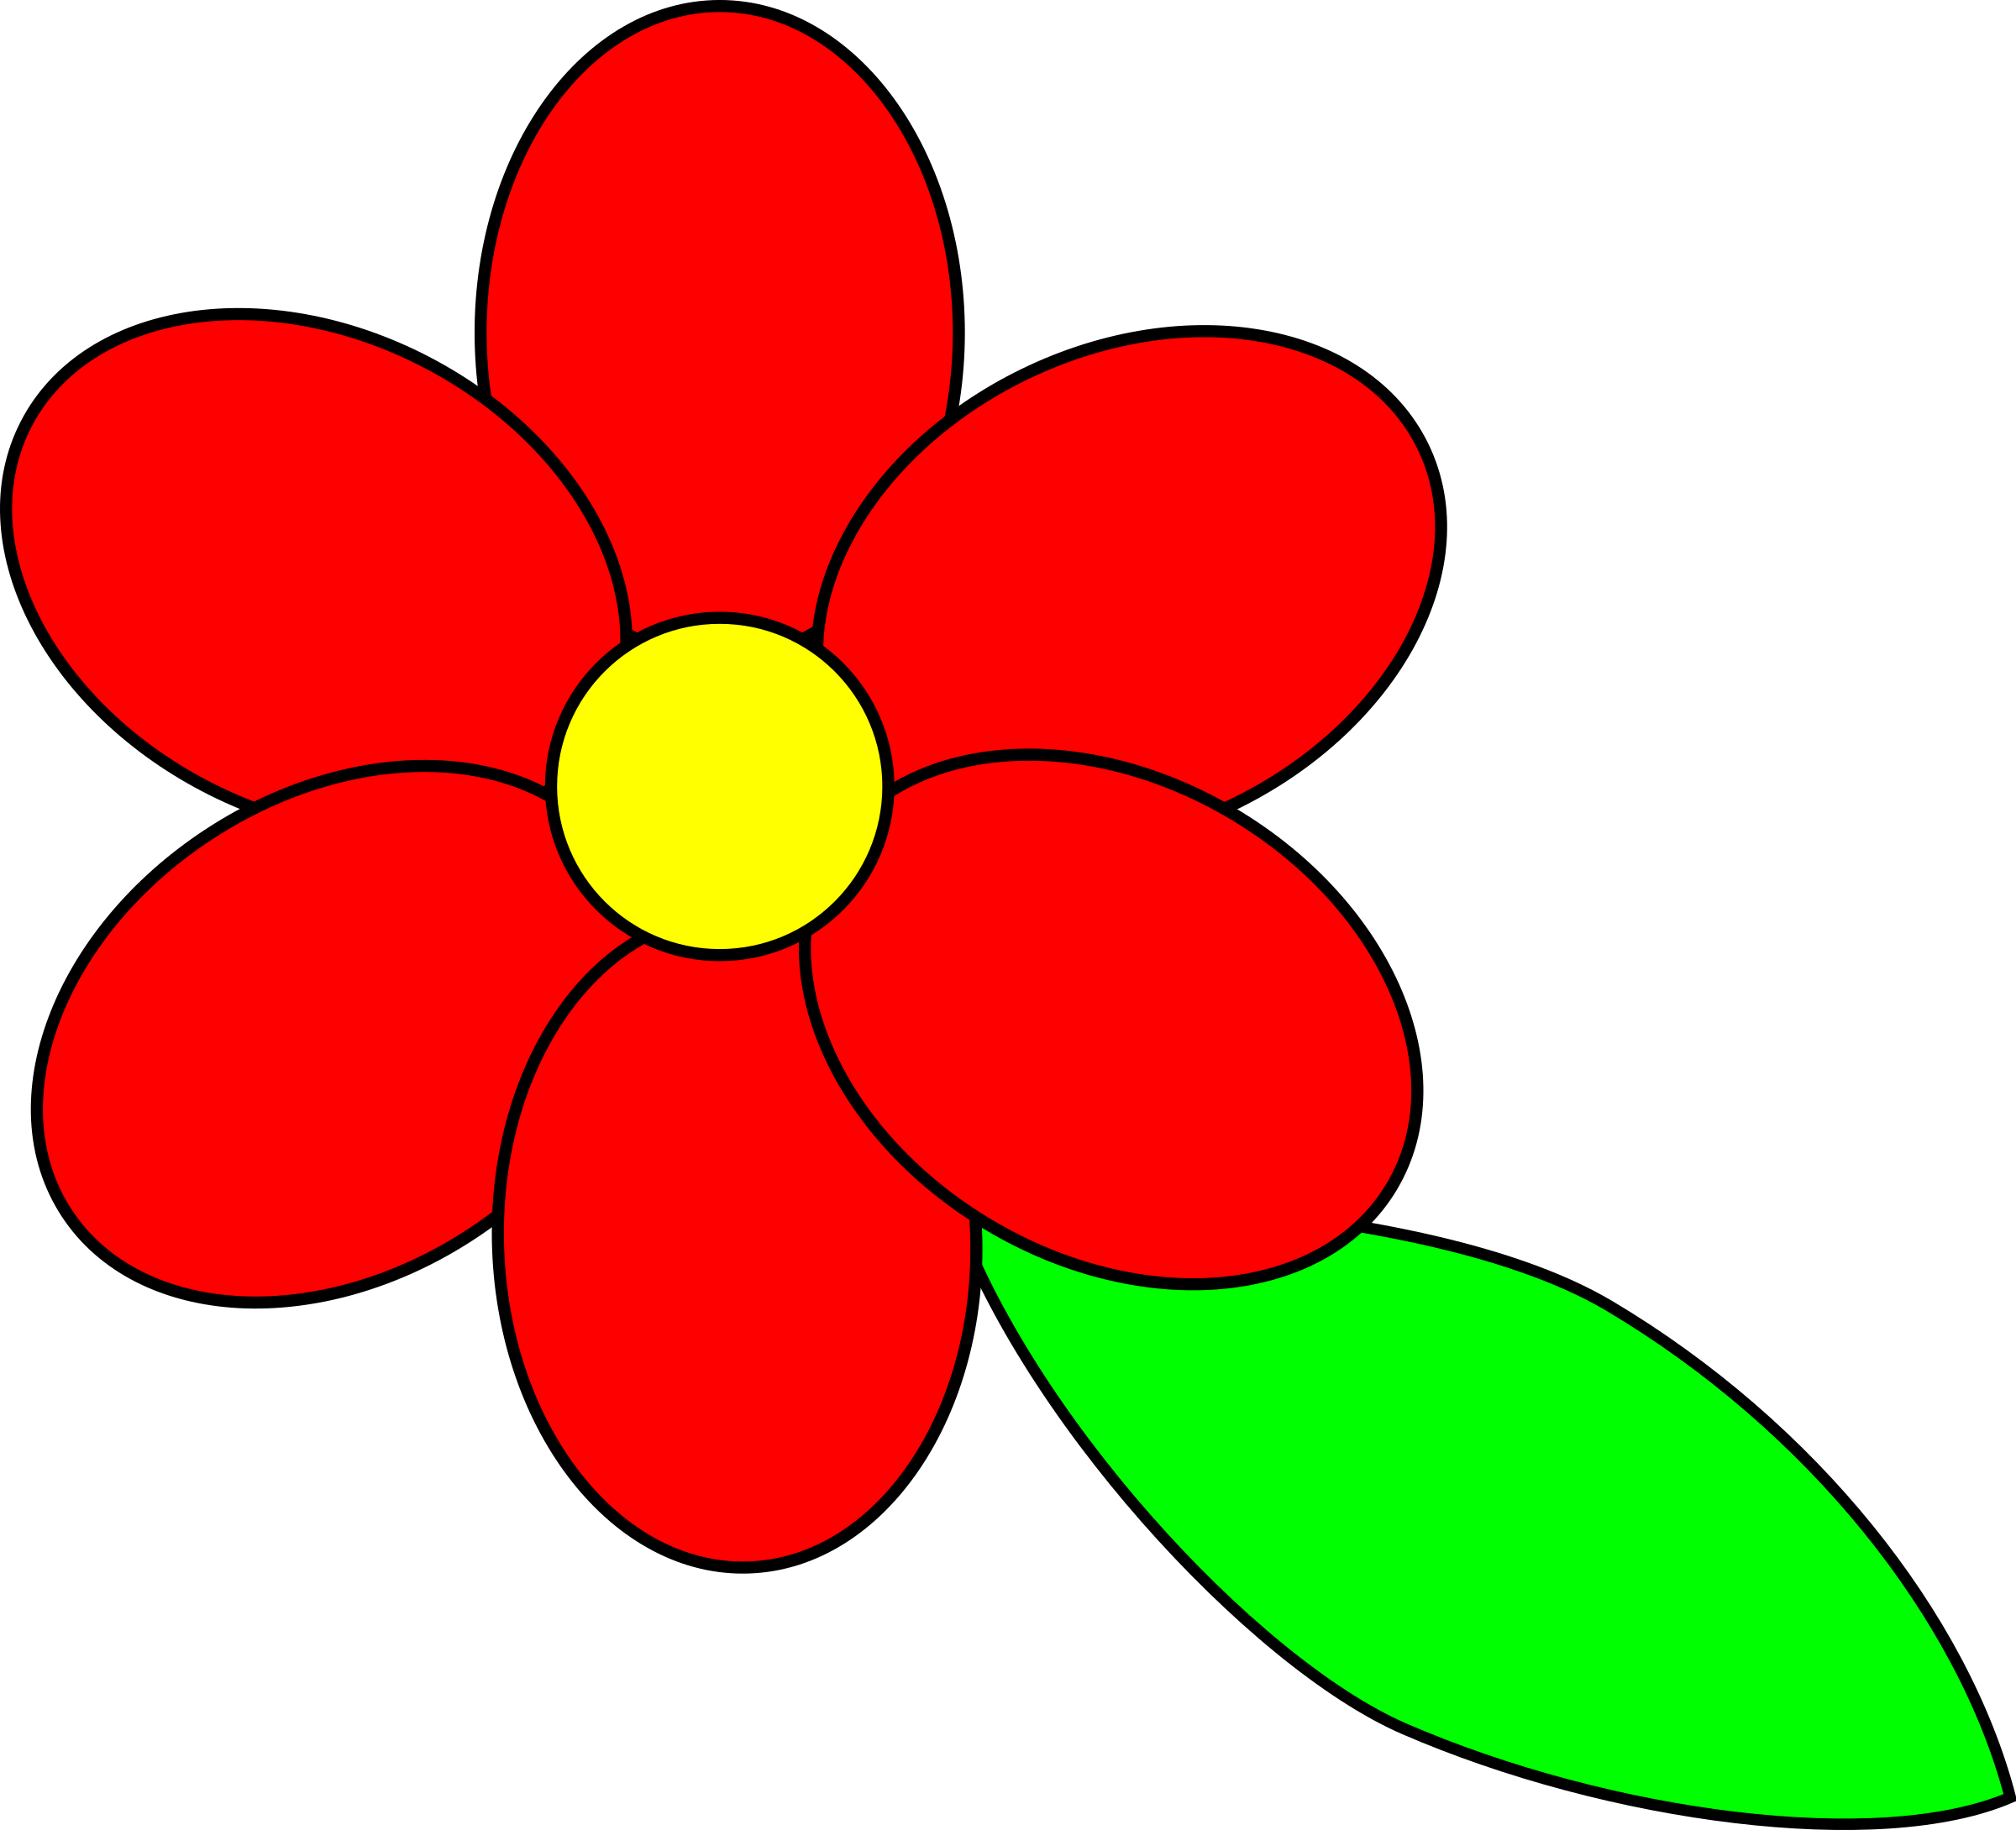 Green Flower with Red Petal Logo - Clipart six red petals black outline green leaf